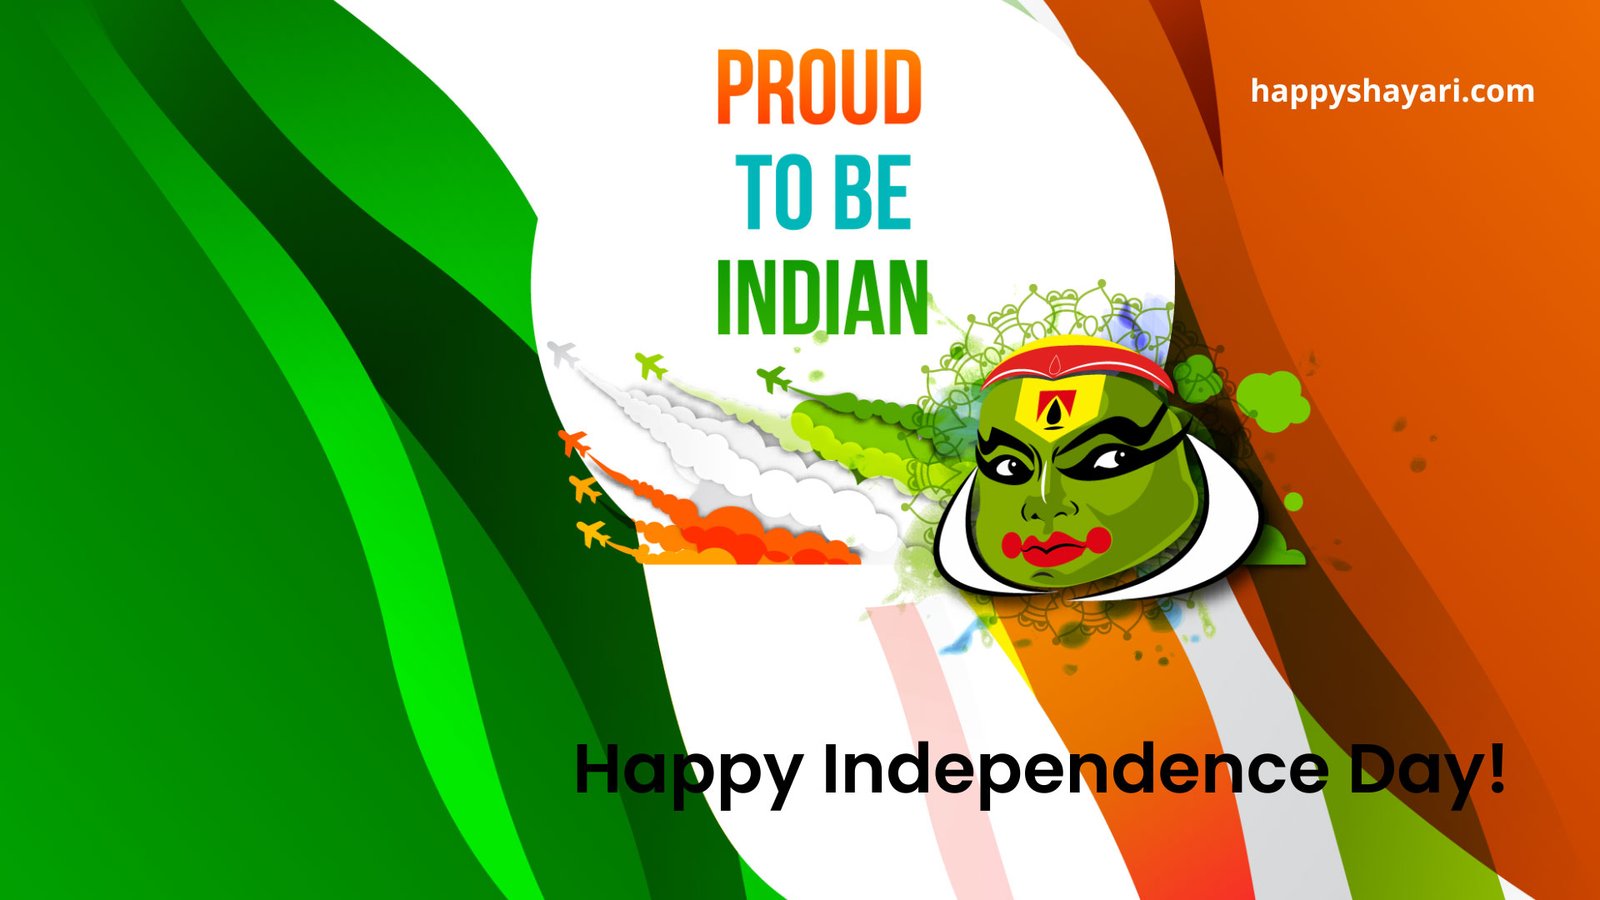 15 August Independence Day Images